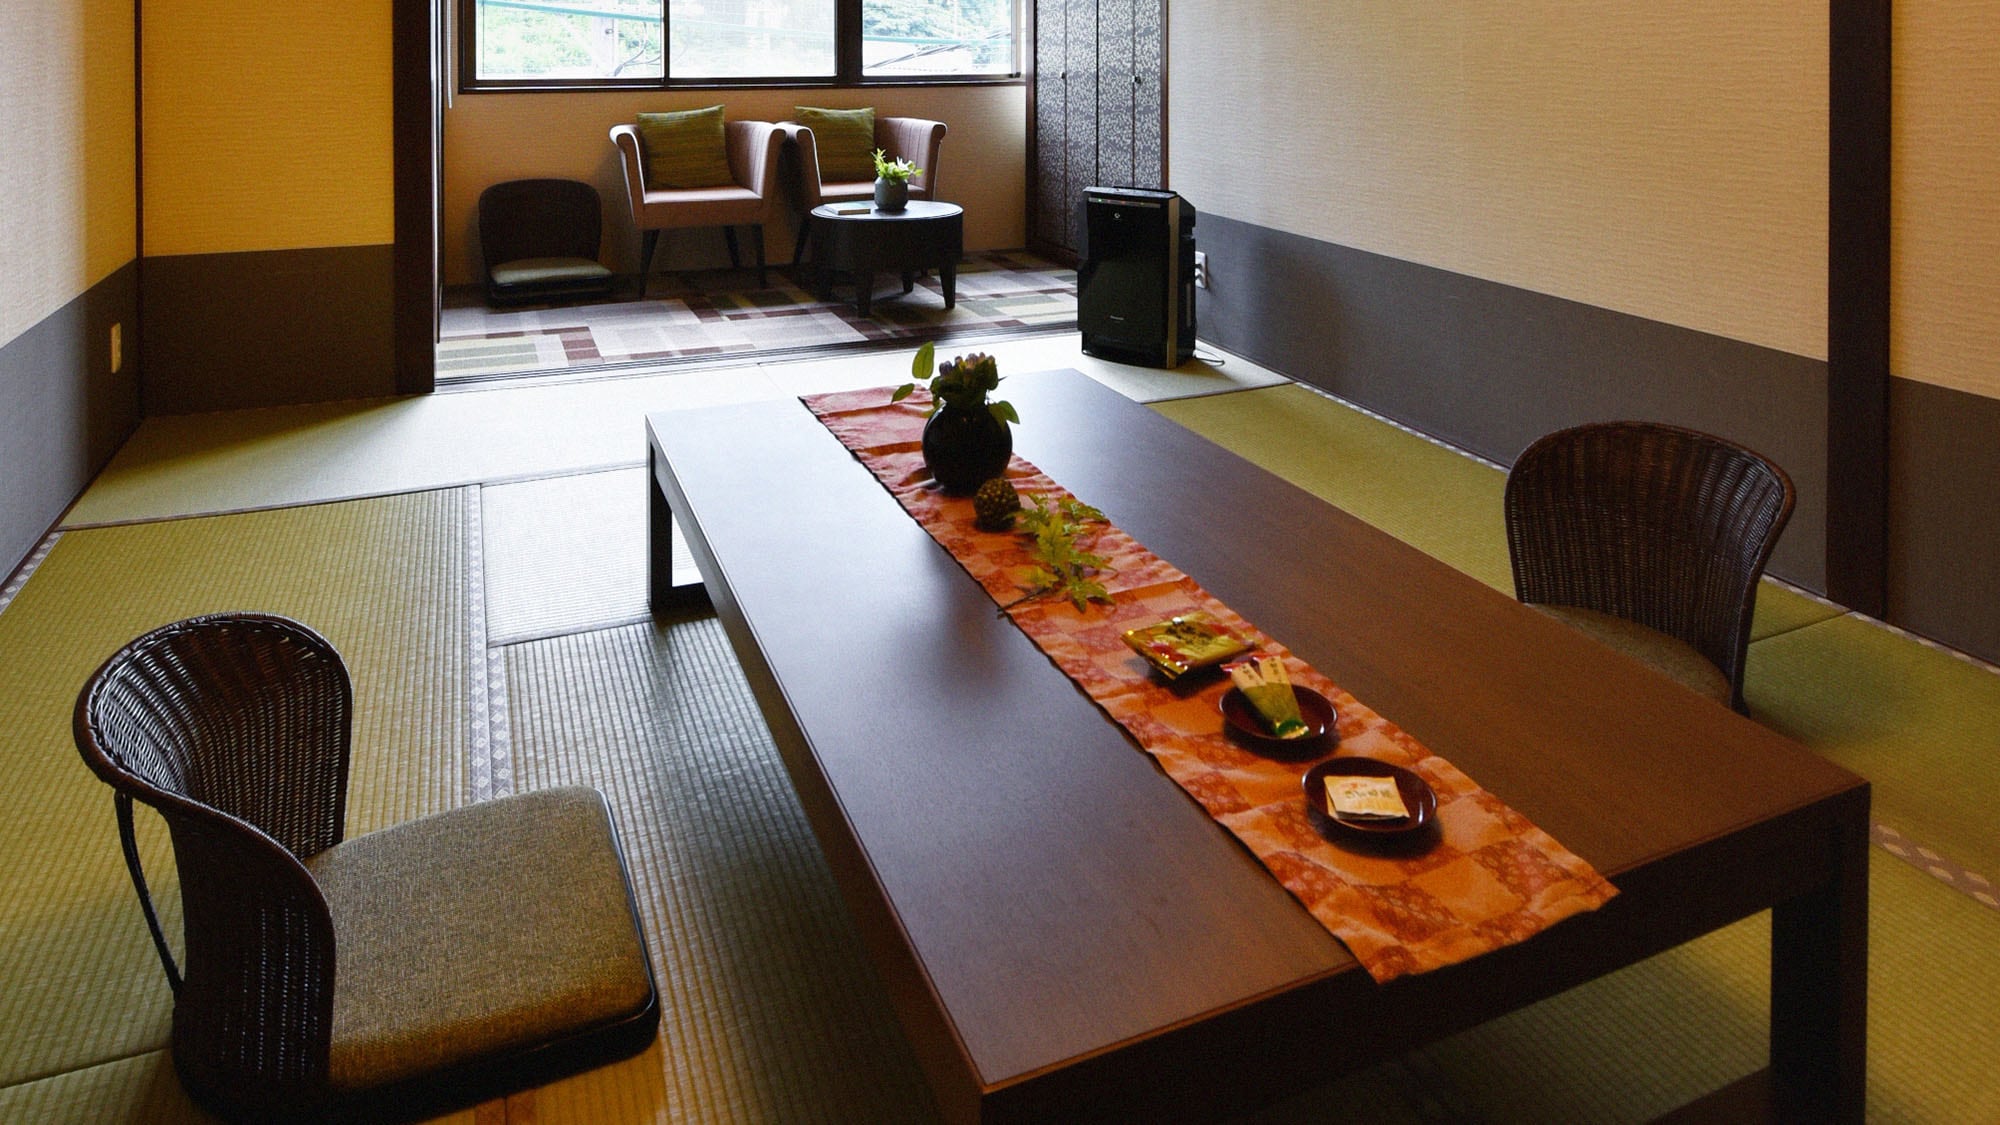 ・ [Example of general guest room] Japanese-style room with 8 to 12 tatami mats. Simple interior without ornate decoration